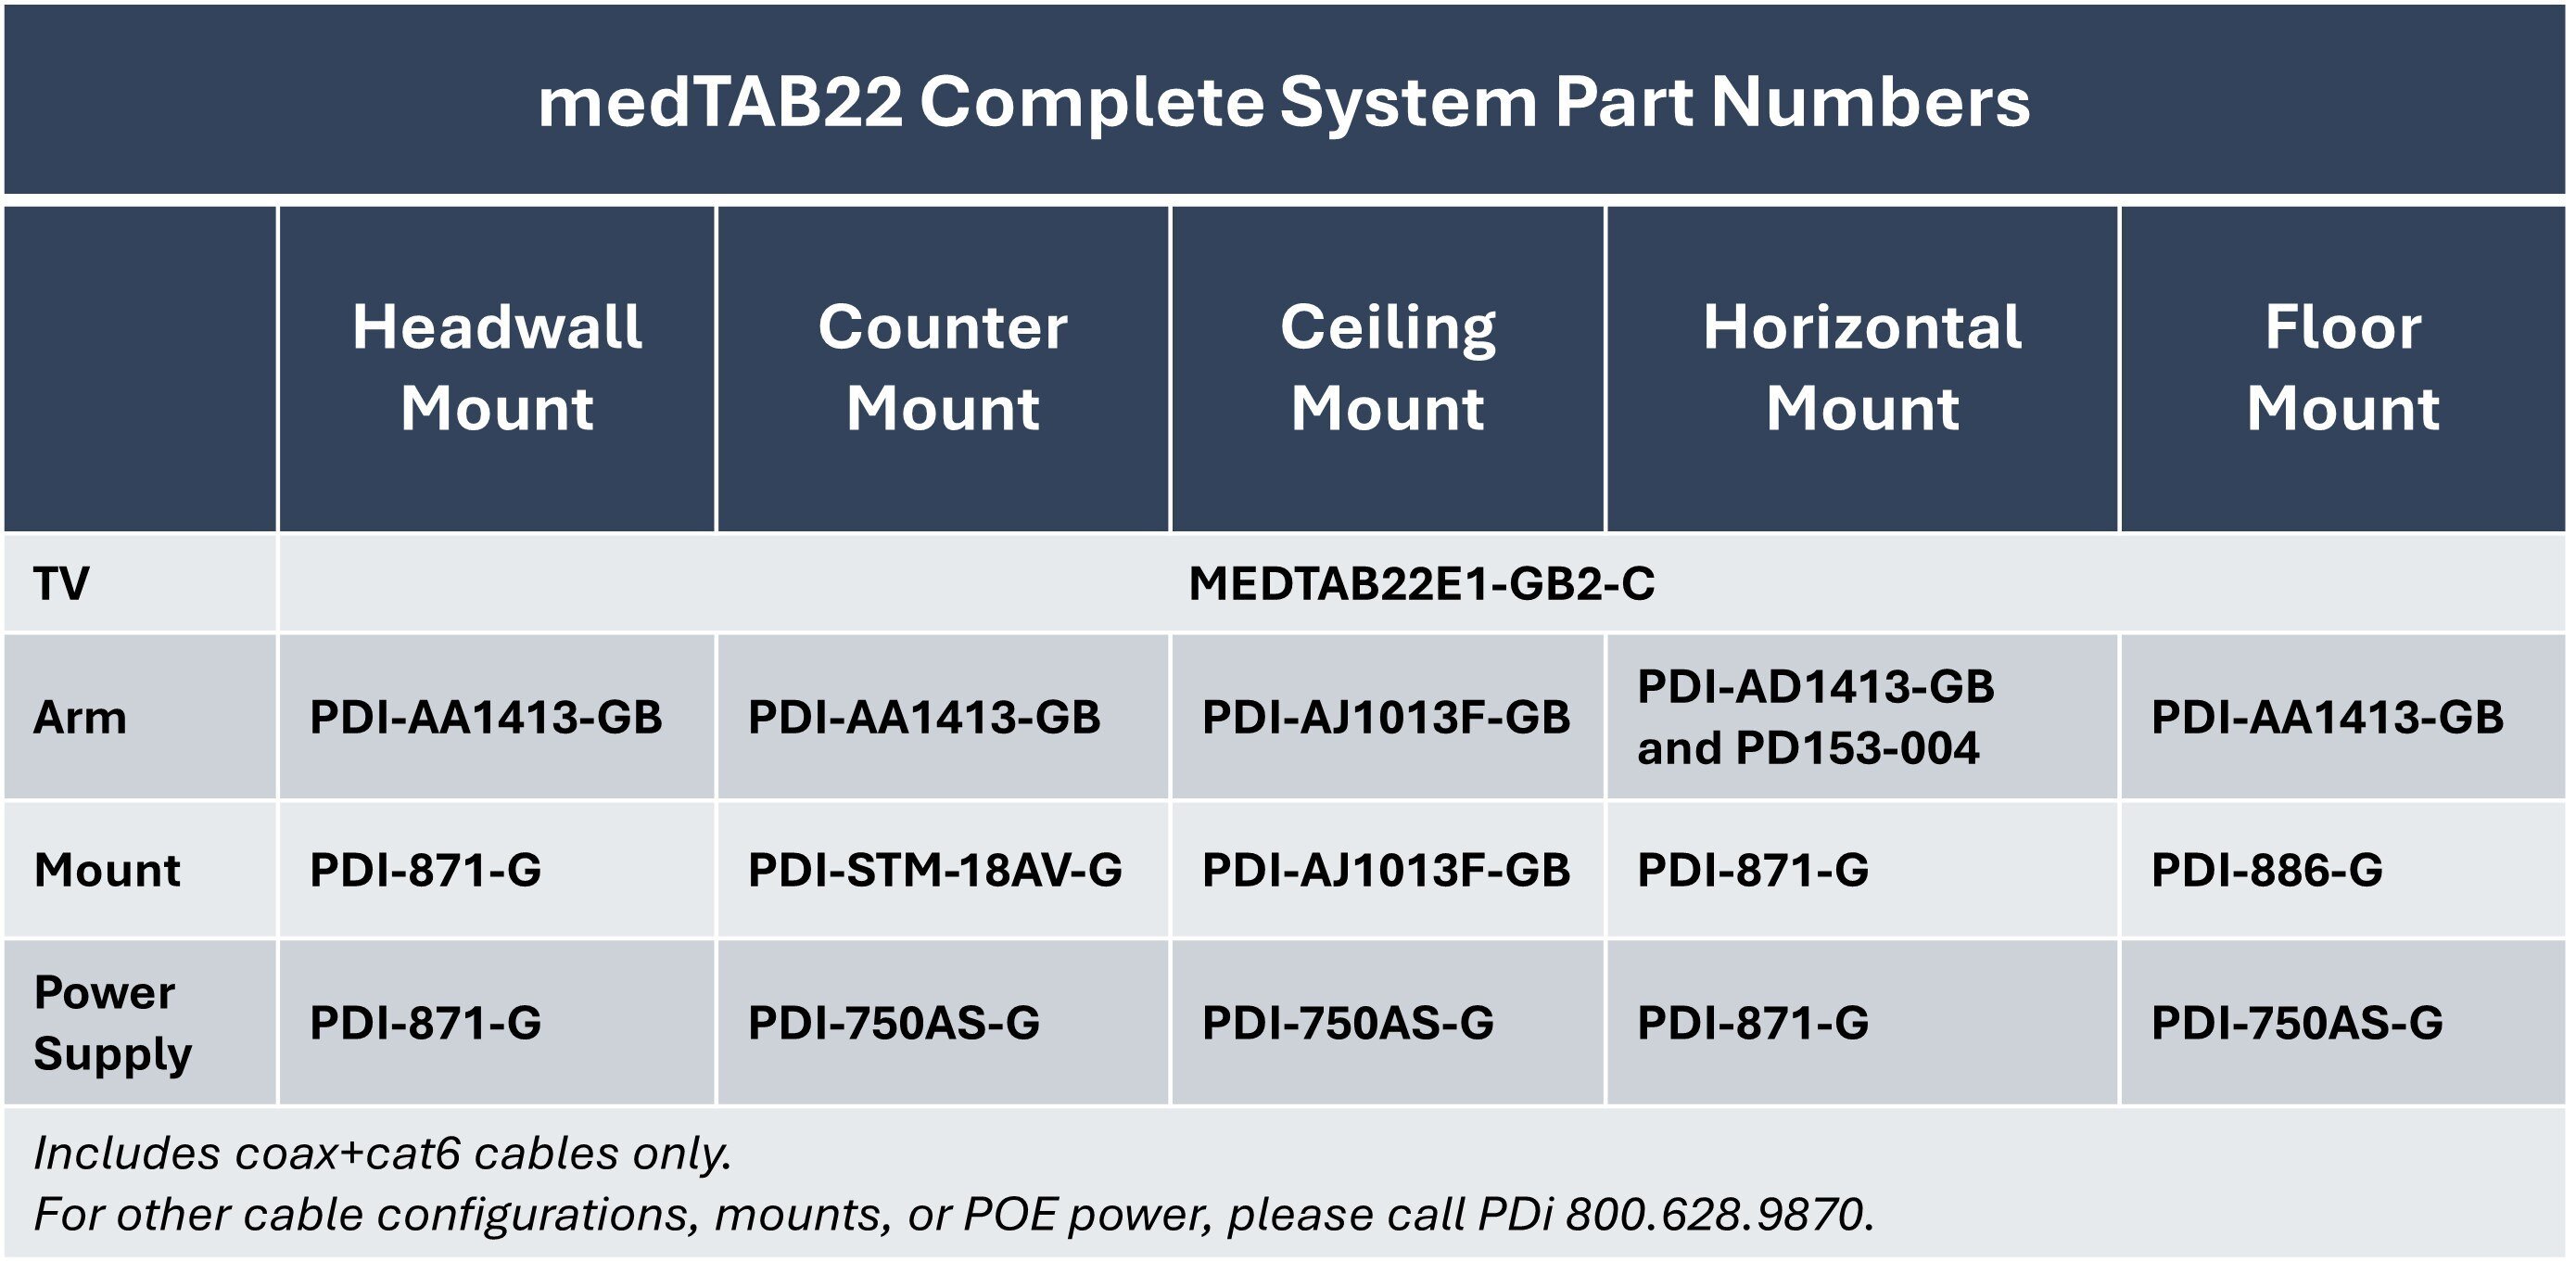 PDi Part Numbers for Complete medTAB22 Personal Patient TV